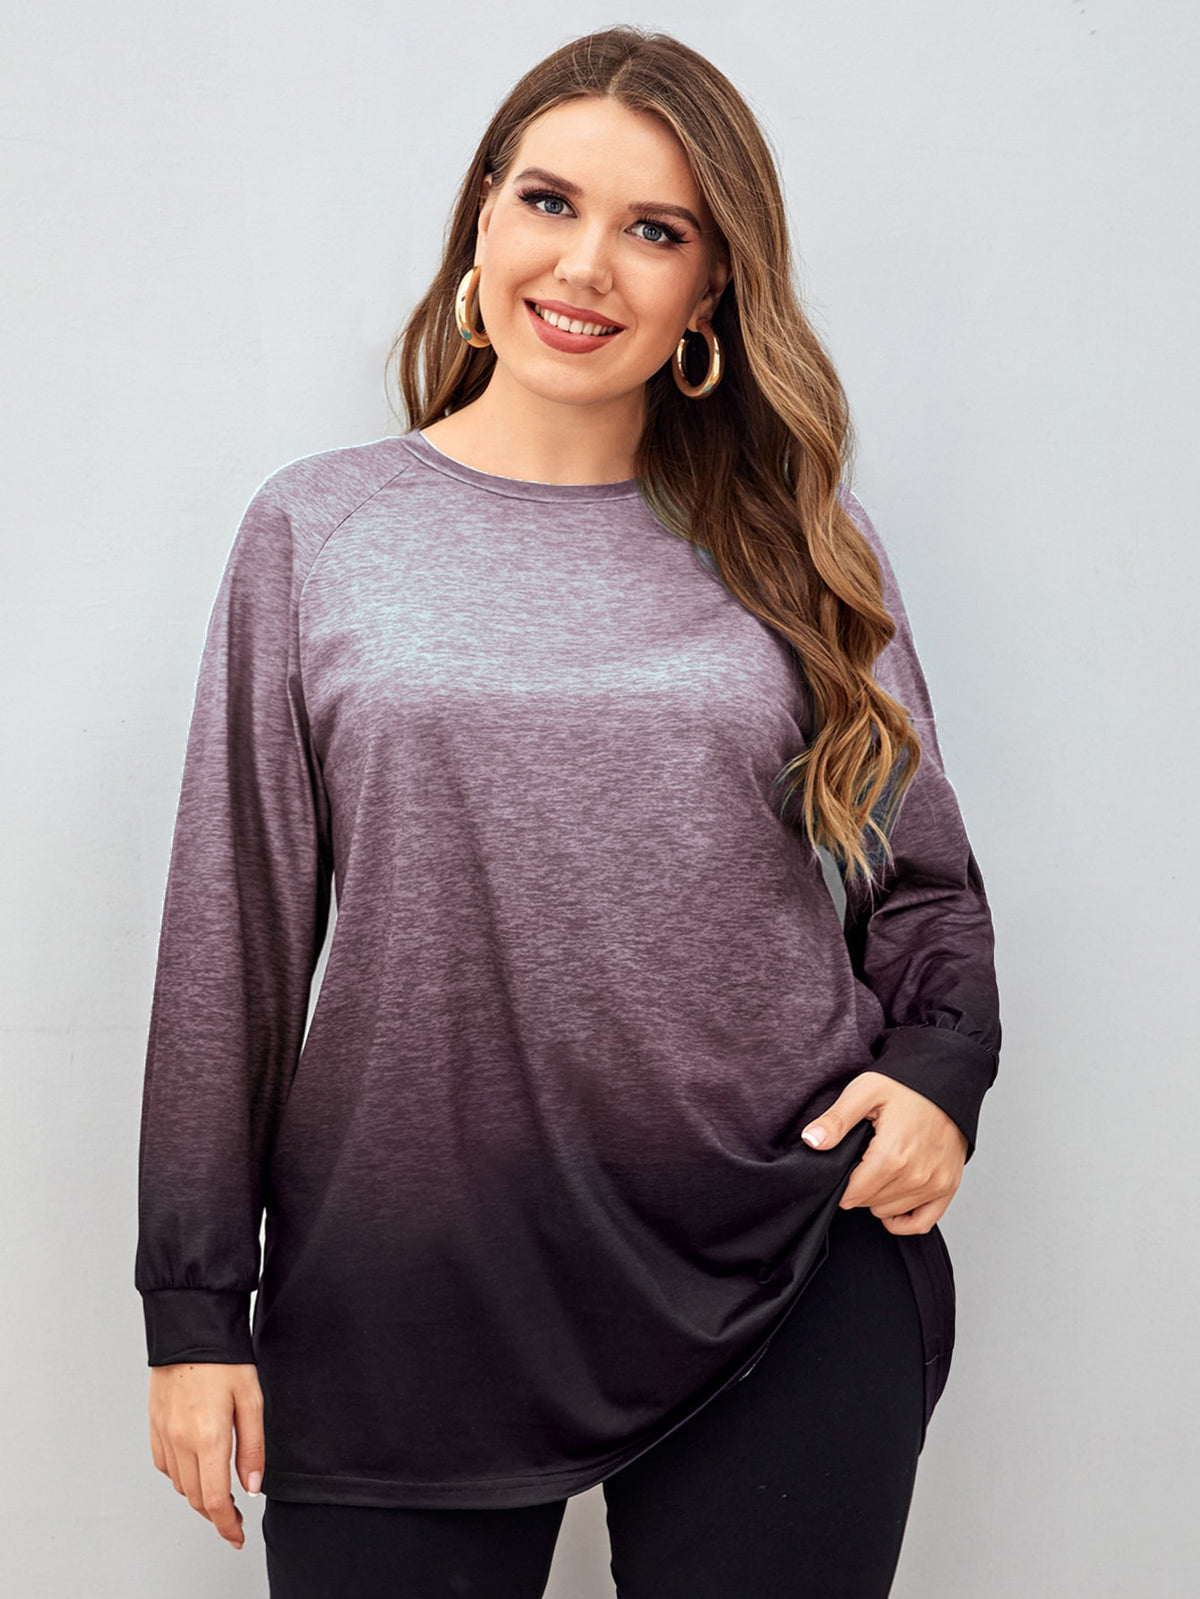 Plus Size Two Tone Tee with Raglan Sleeve - Multicolor-8 / 4XL